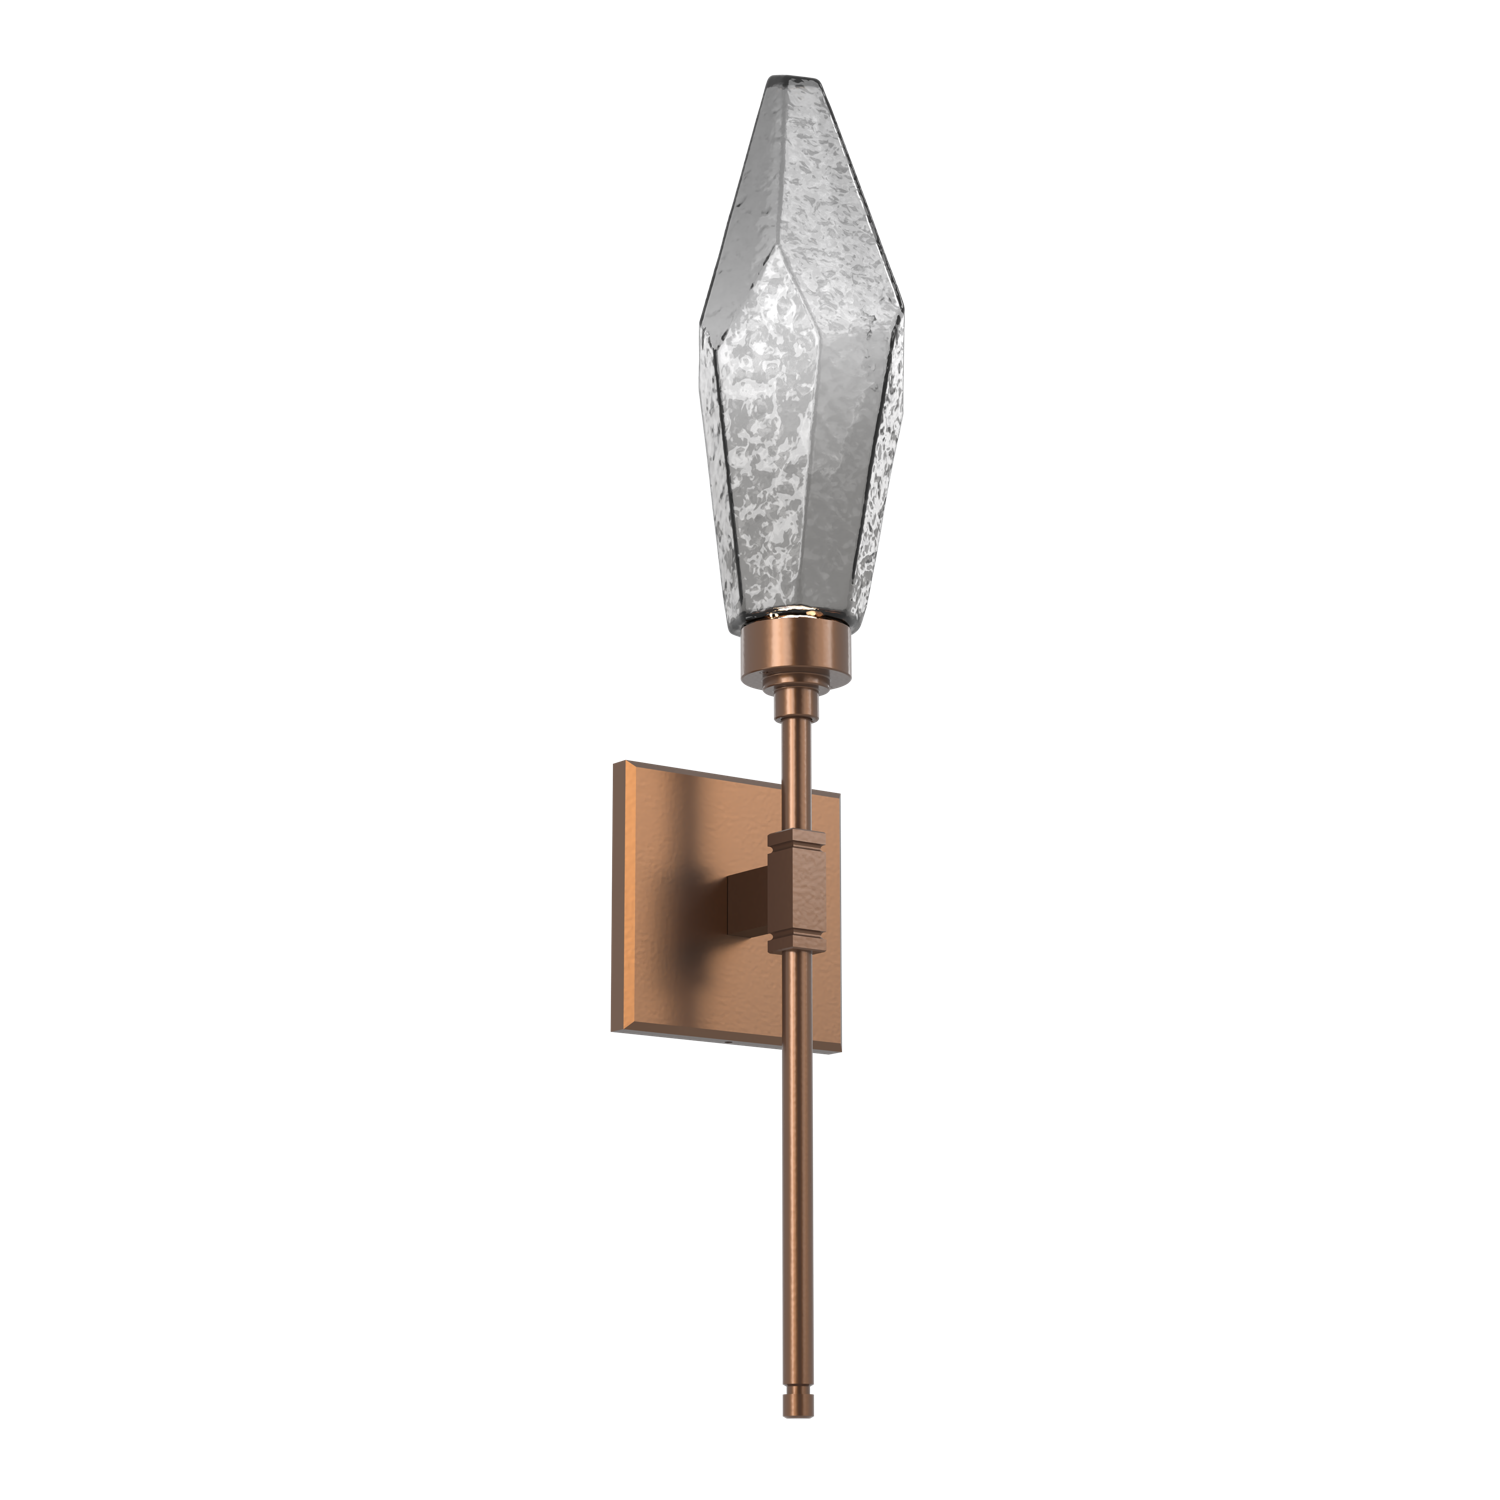 IDB0050-04-BB-CS-Hammerton-Studio-Rock-Crystal-ada-certified-belvedere-wall-sconce-with-burnished-bronze-finish-and-chilled-smoke-glass-shades-and-LED-lamping